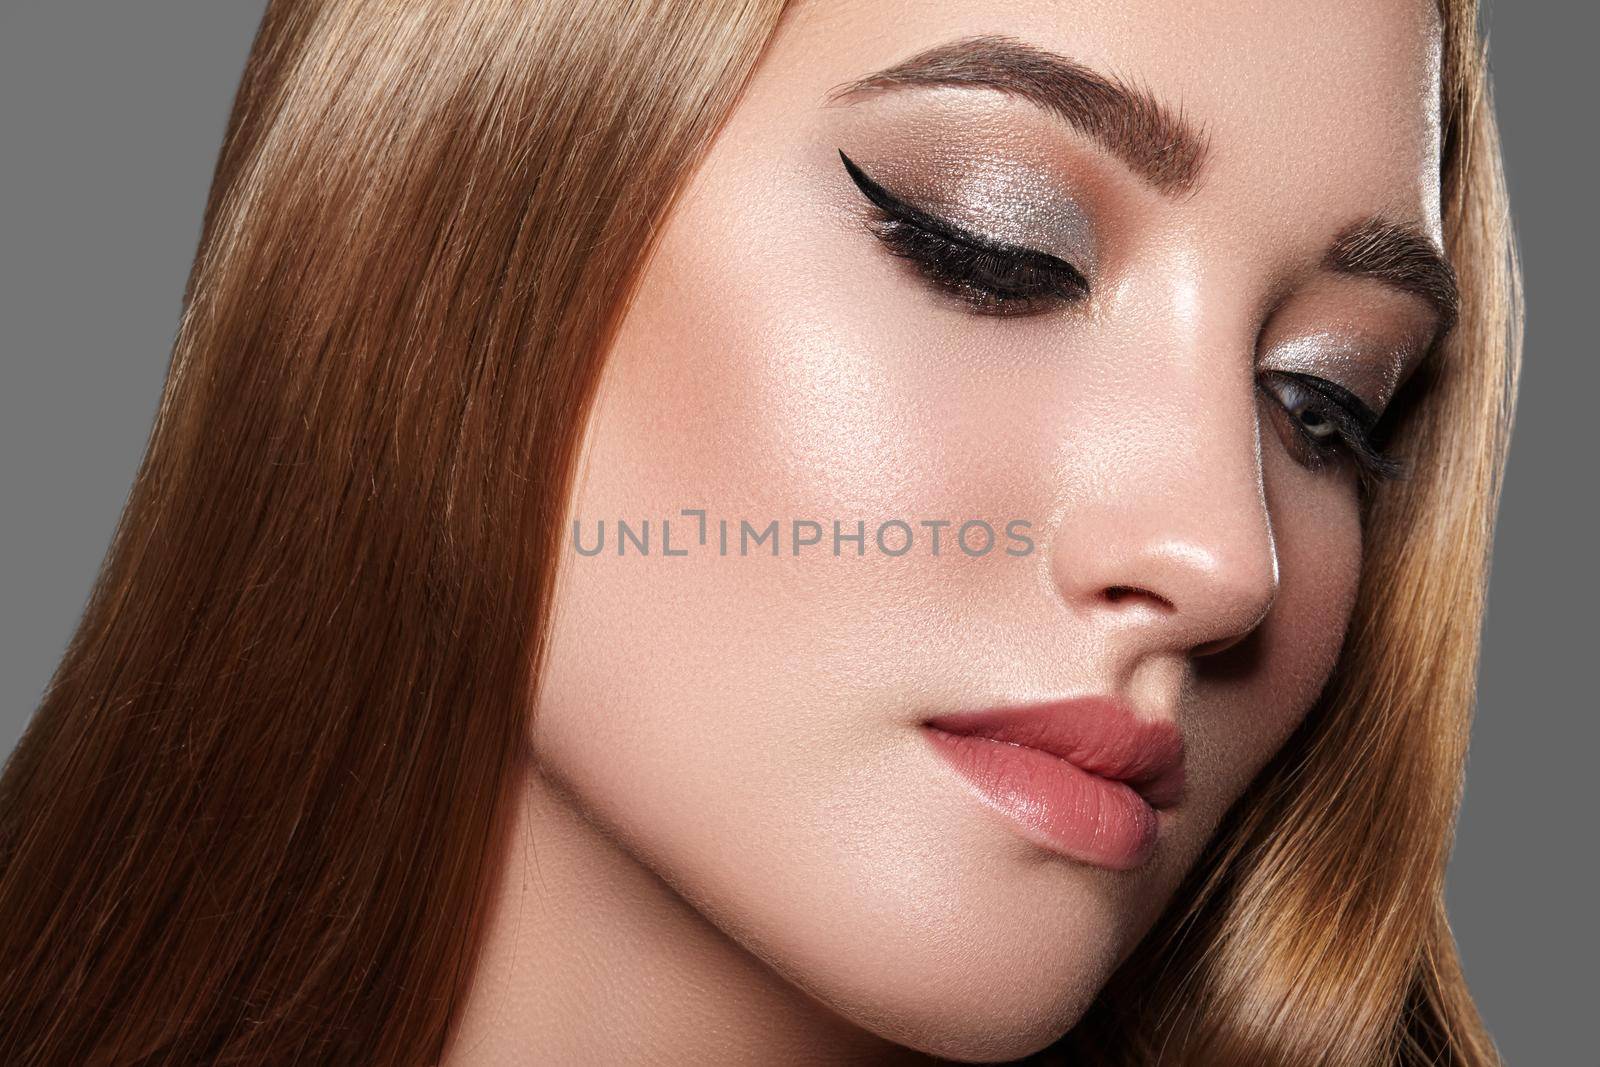 Beautiful Woman with Professional Makeup. Celebrate Style Eye Make-up, Perfect Eyebrows, Shine Skin. Bright Fashion Look. Black Liner, Shimmer Powder and Silver Eyeshadows